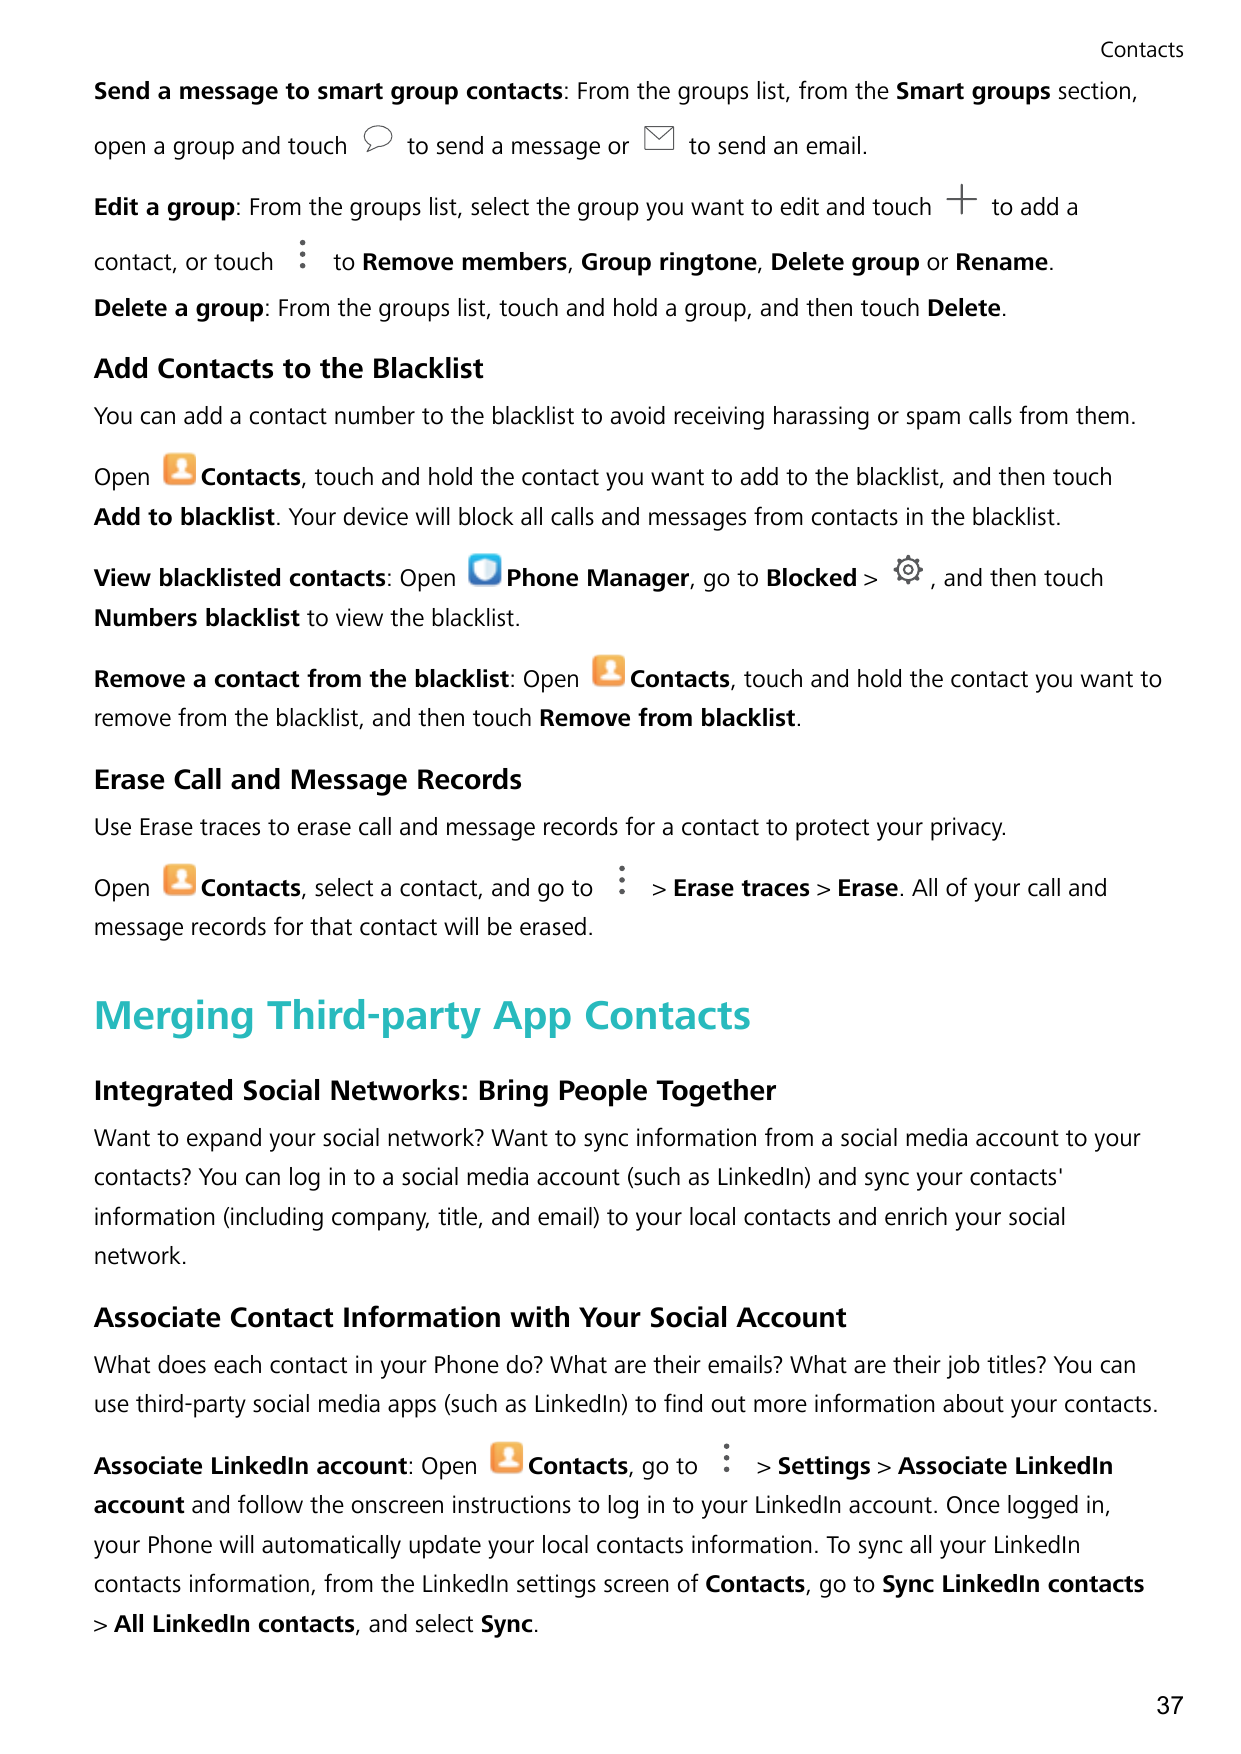 ContactsSend a message to smart group contacts: From the groups list, from the Smart groups section,open a group and touchto sen